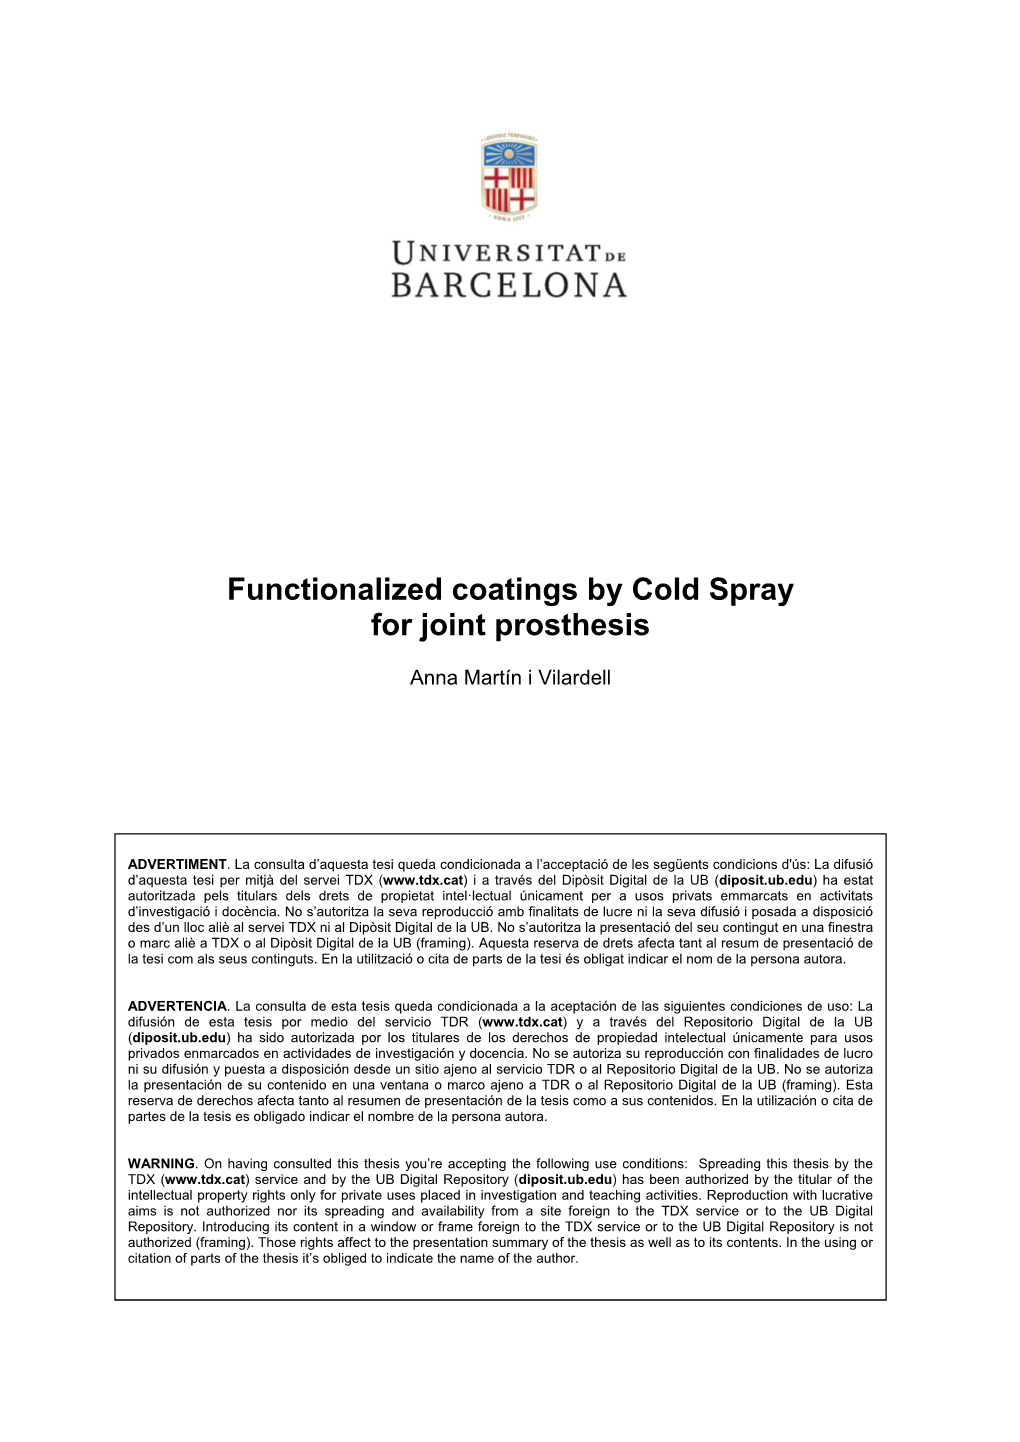 Functionalized Coatings by Cold Spray for Joint Prosthesis